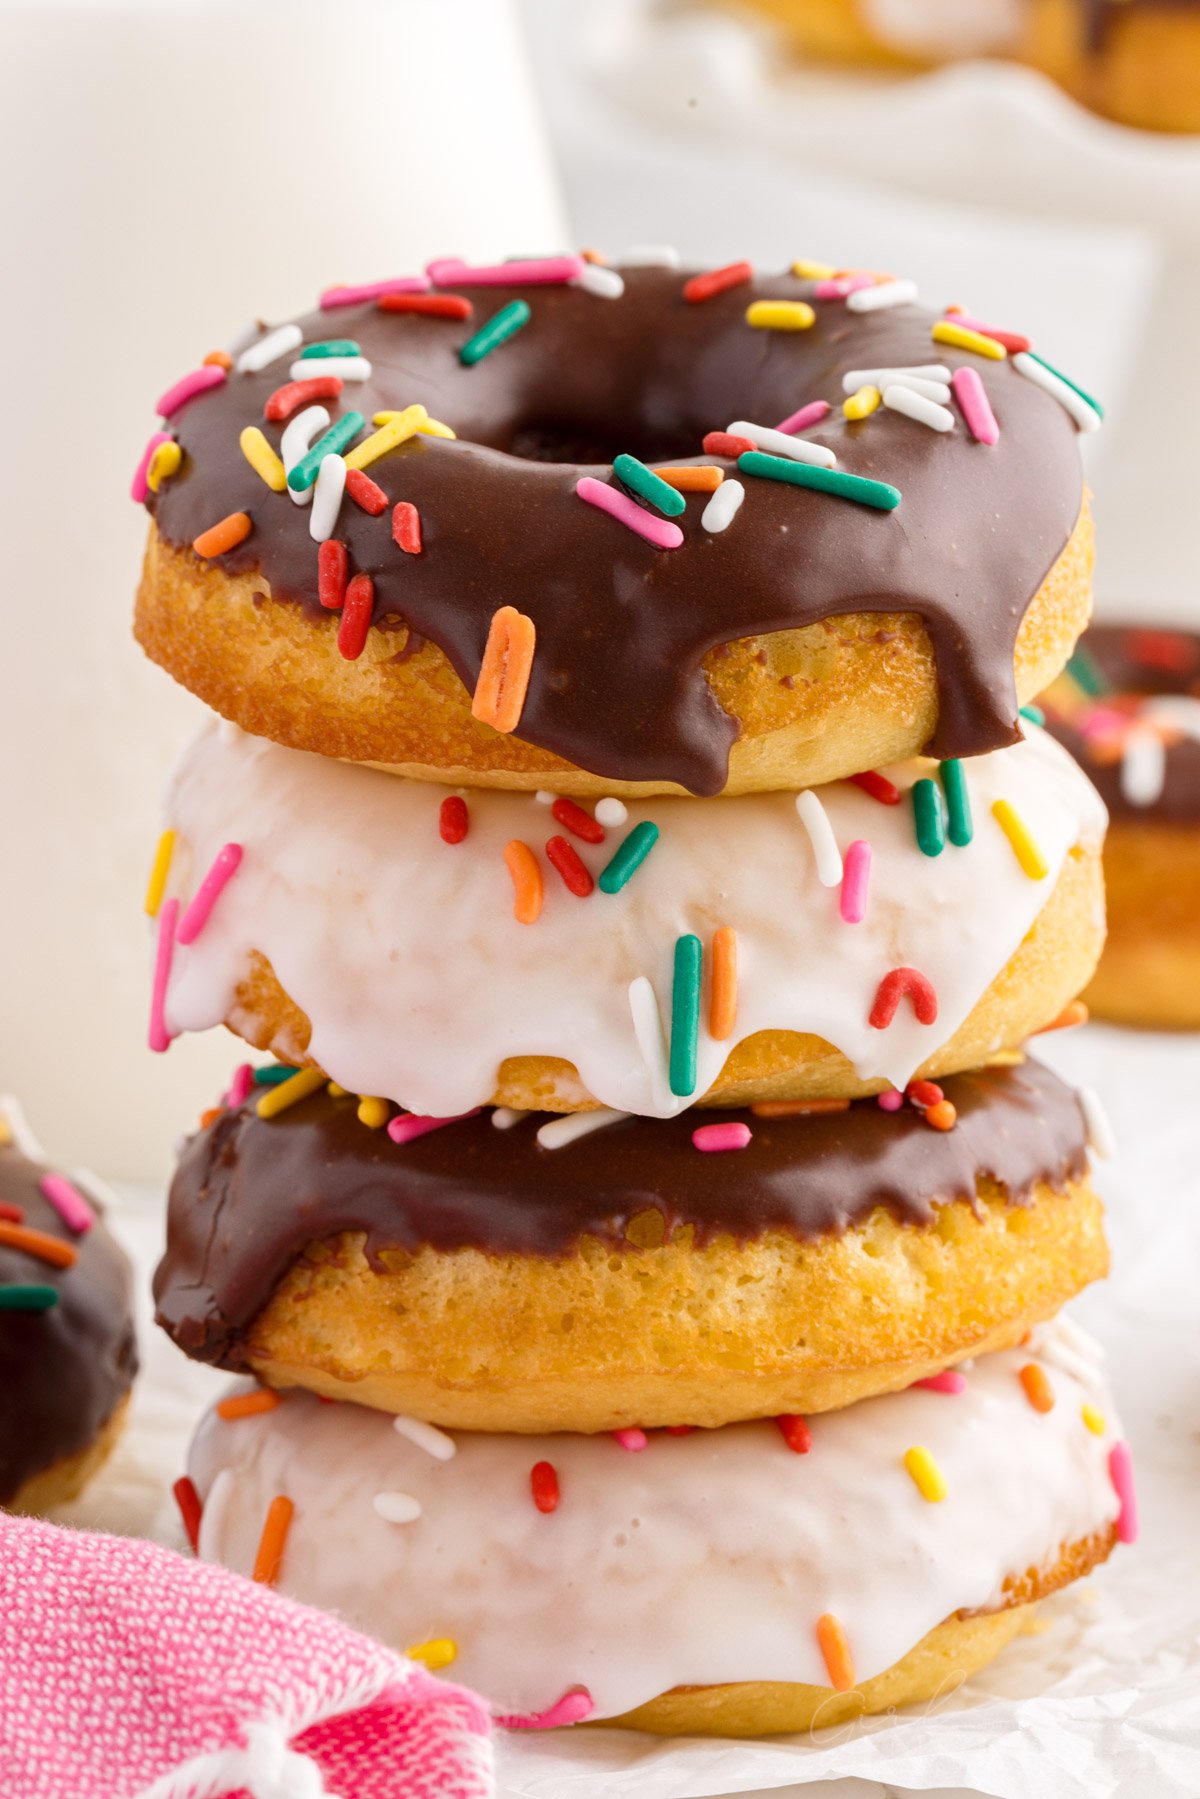 Cake Mix Donuts stacked on top of each other.